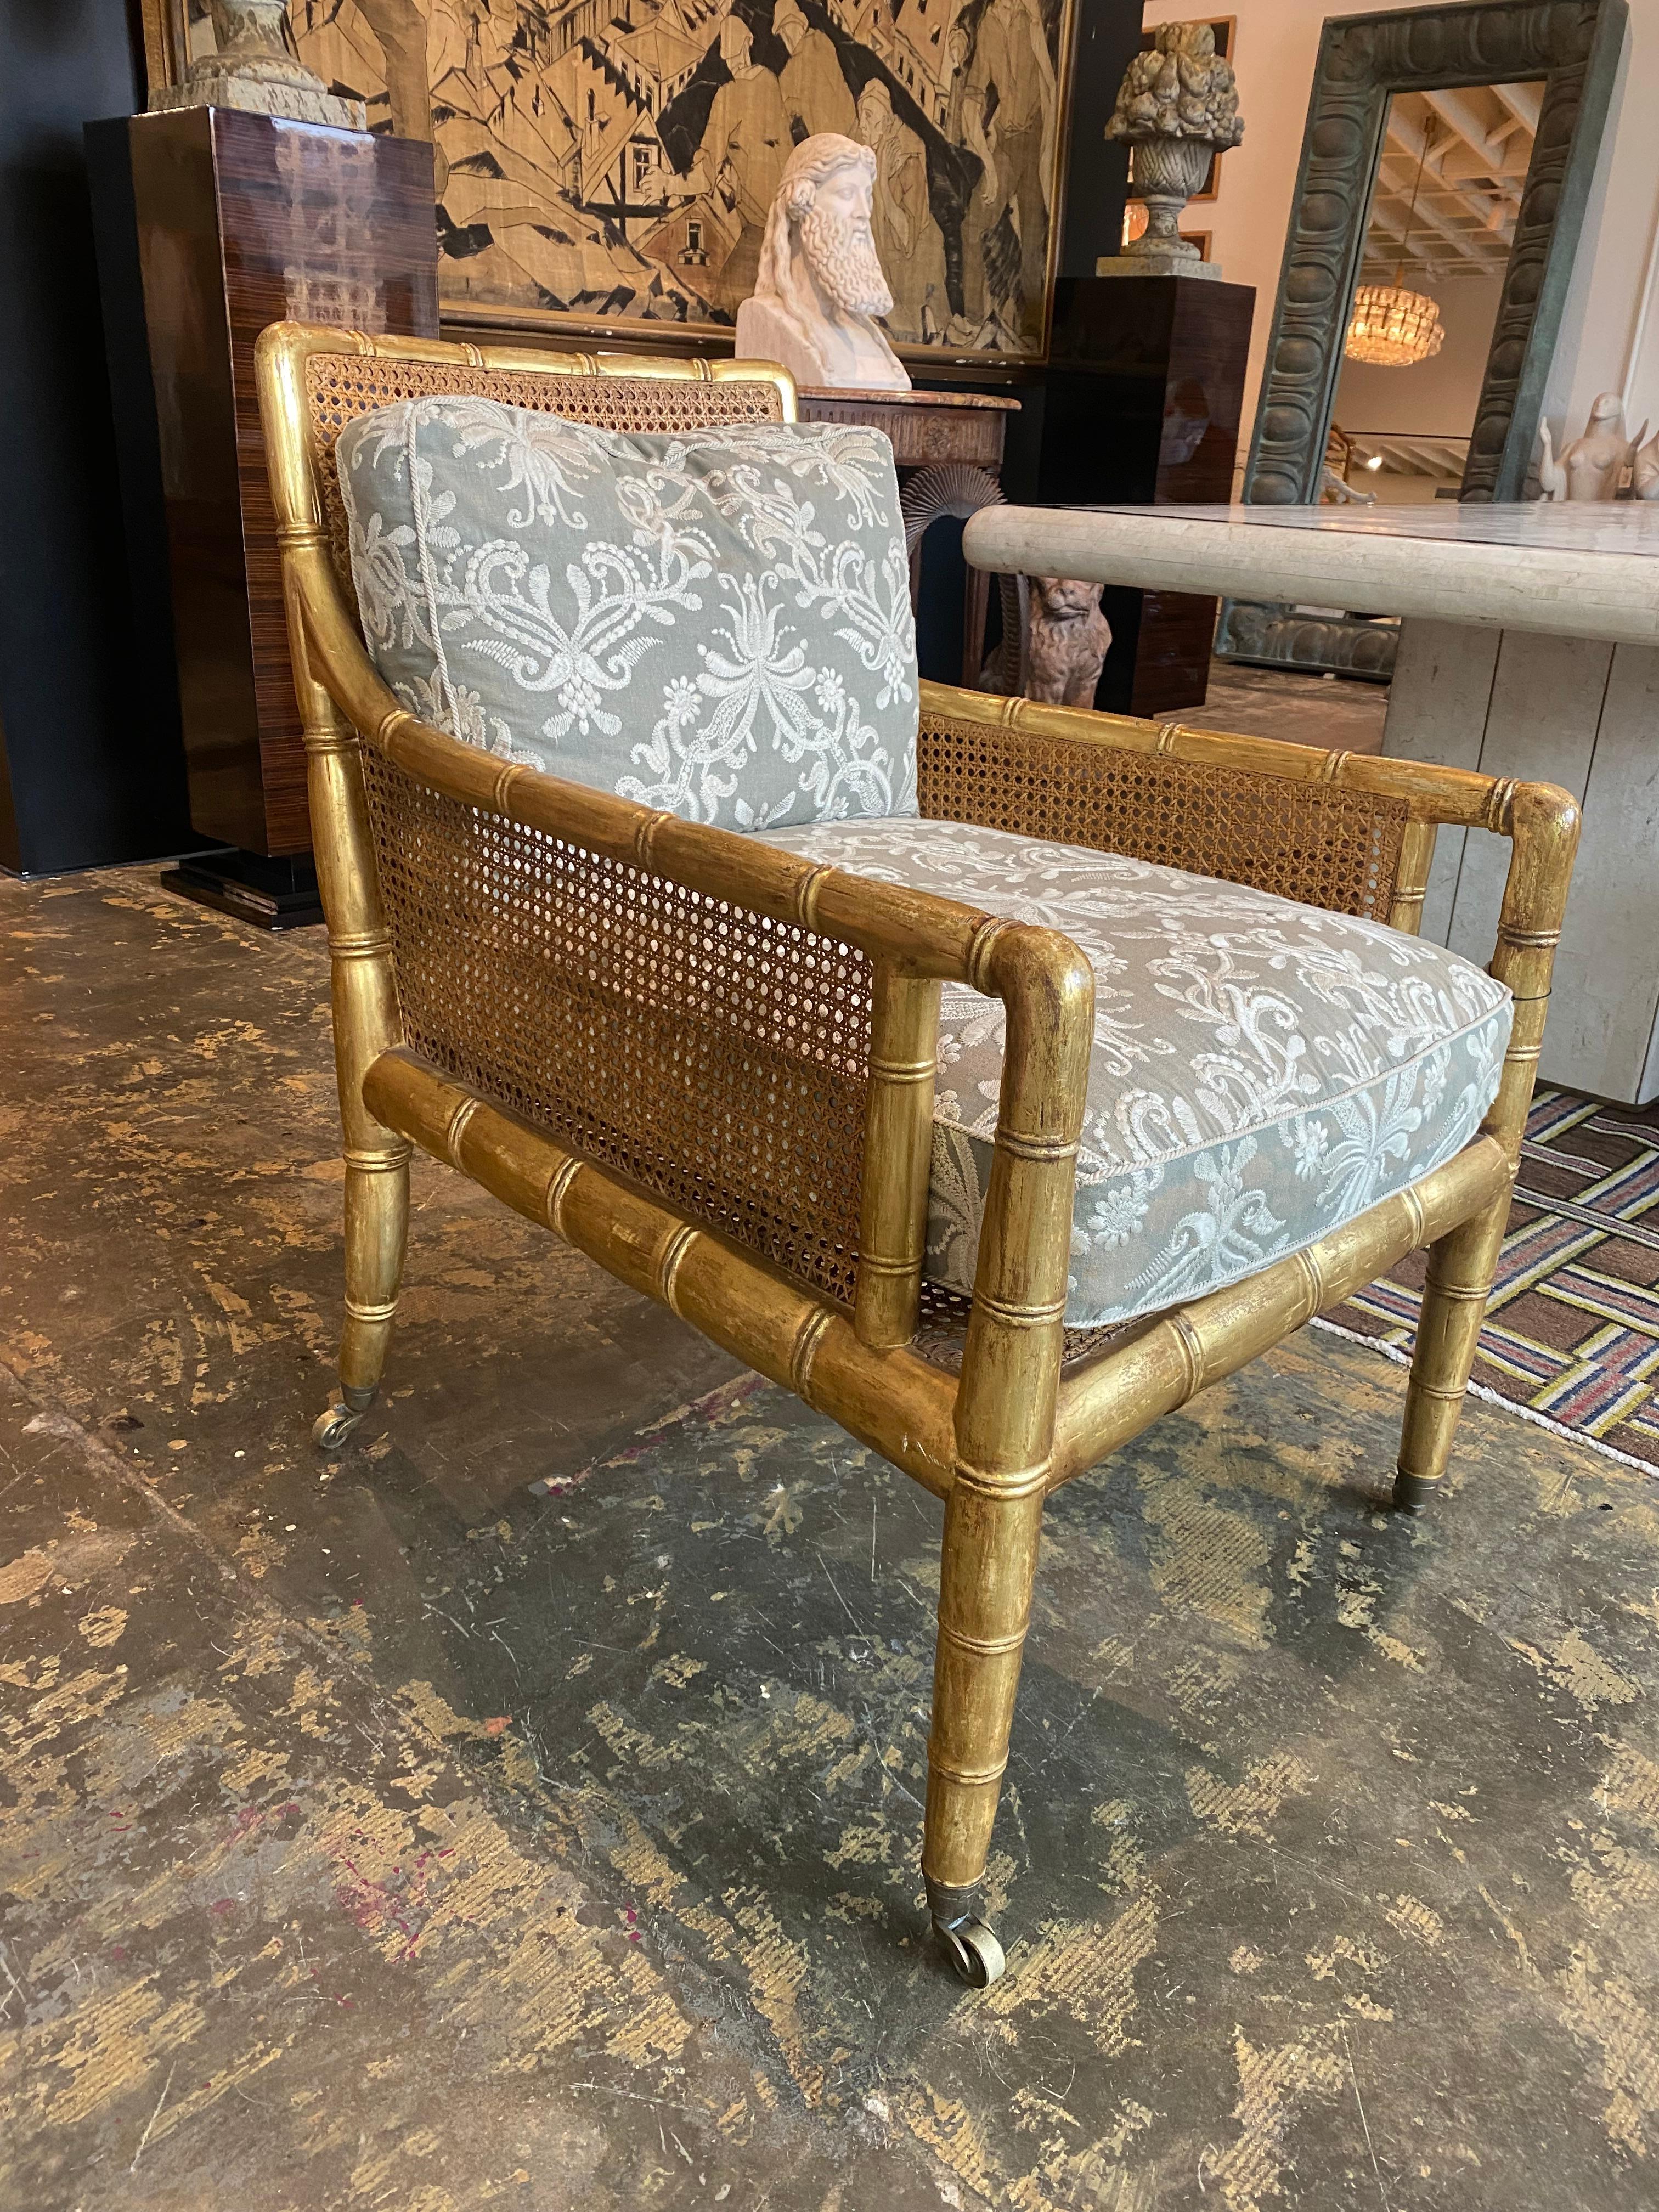 A beautiful reproduction Regency gilt bamboo caned bergere in excellent condition with loose seat and back cushions in an embroidered linen. Brass casters terminating the legs. The chair was manufactured by Dessin Fournir and was a sample in one of